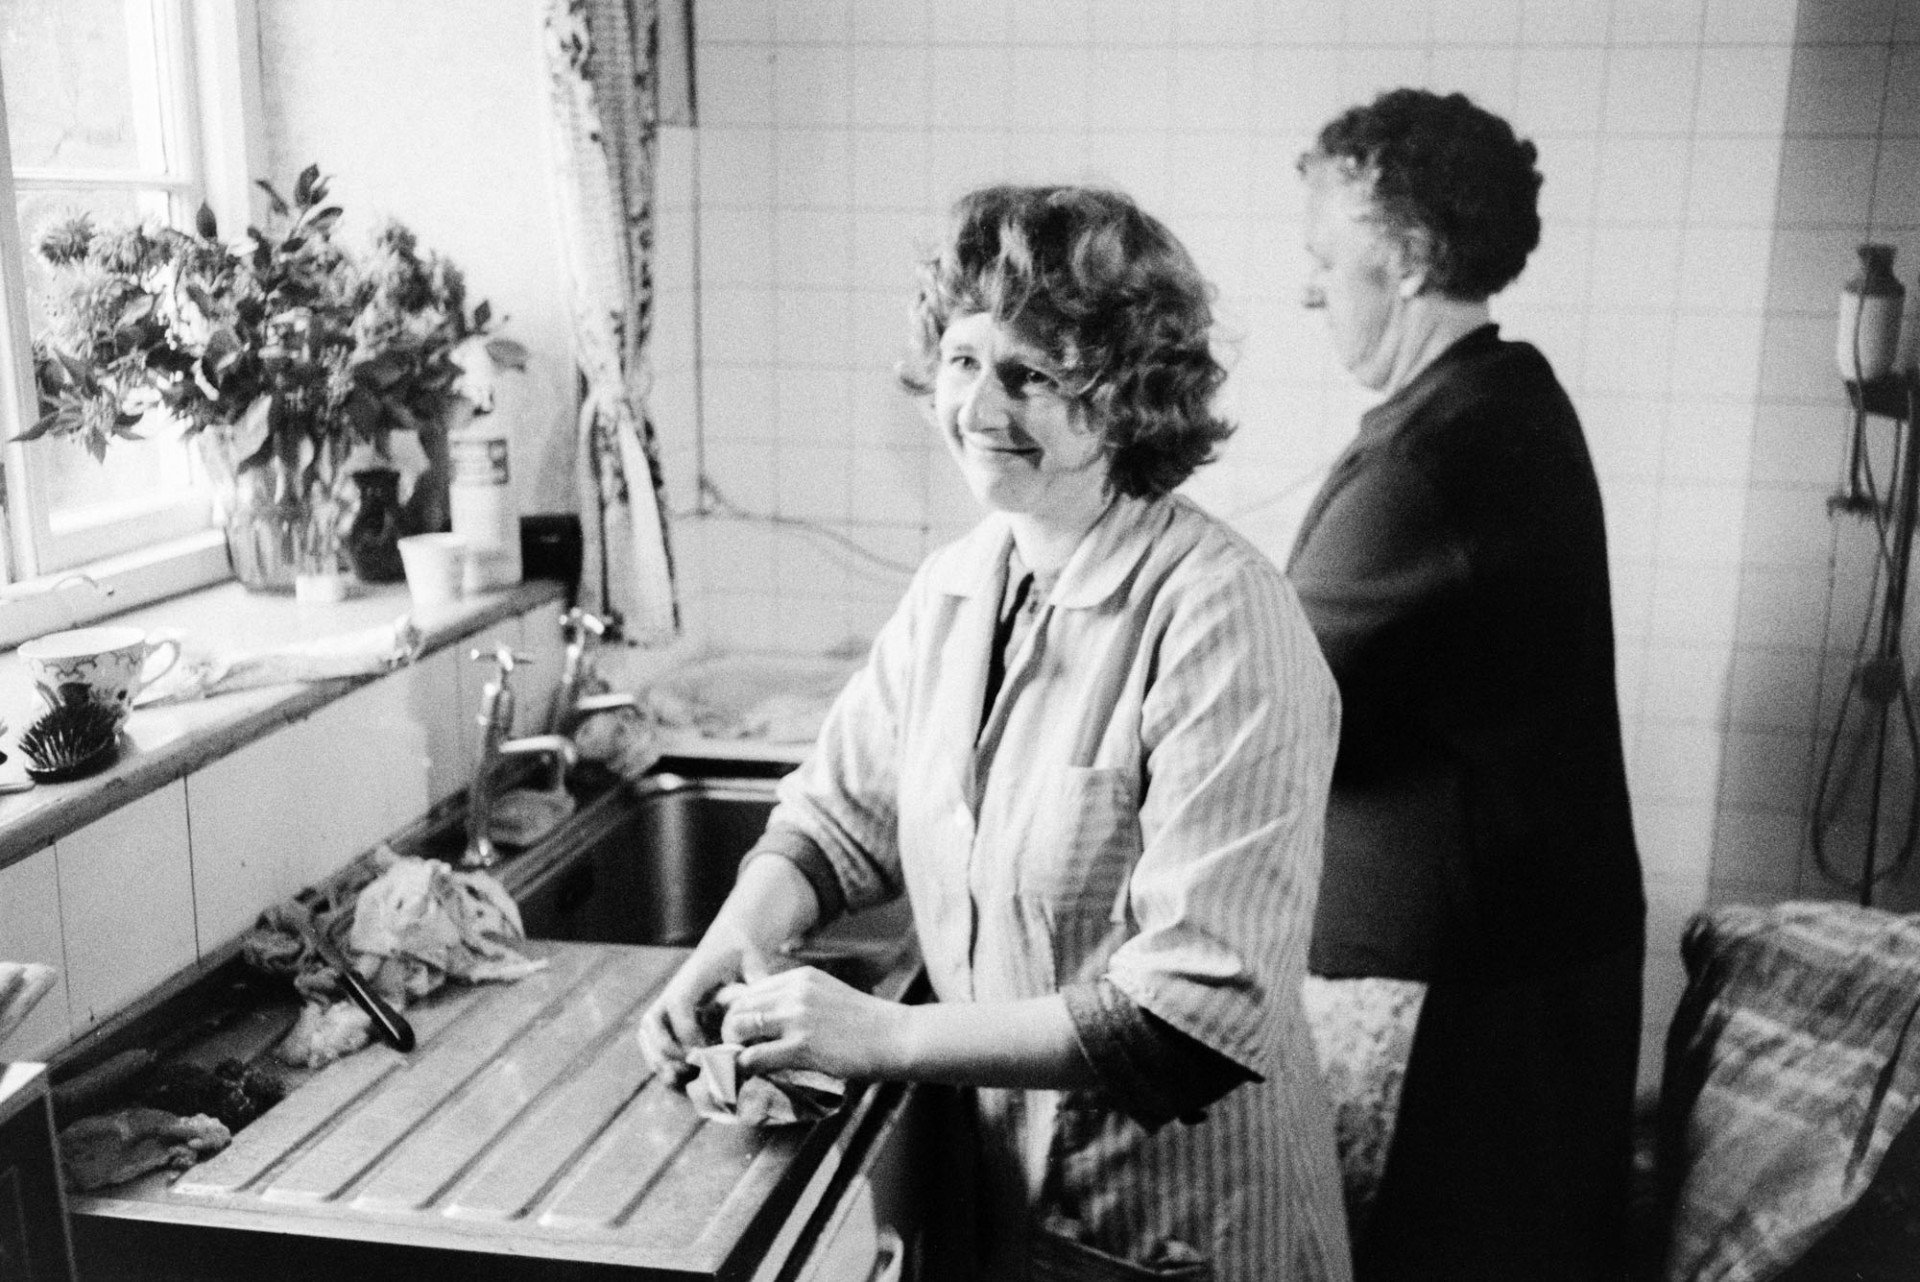 Marylin Bourne and another woman cleaning the sink in the kitchen at Mill Road Farm, Beaford after preparing Christmas chickens. The farm was also known as Jeffrys.